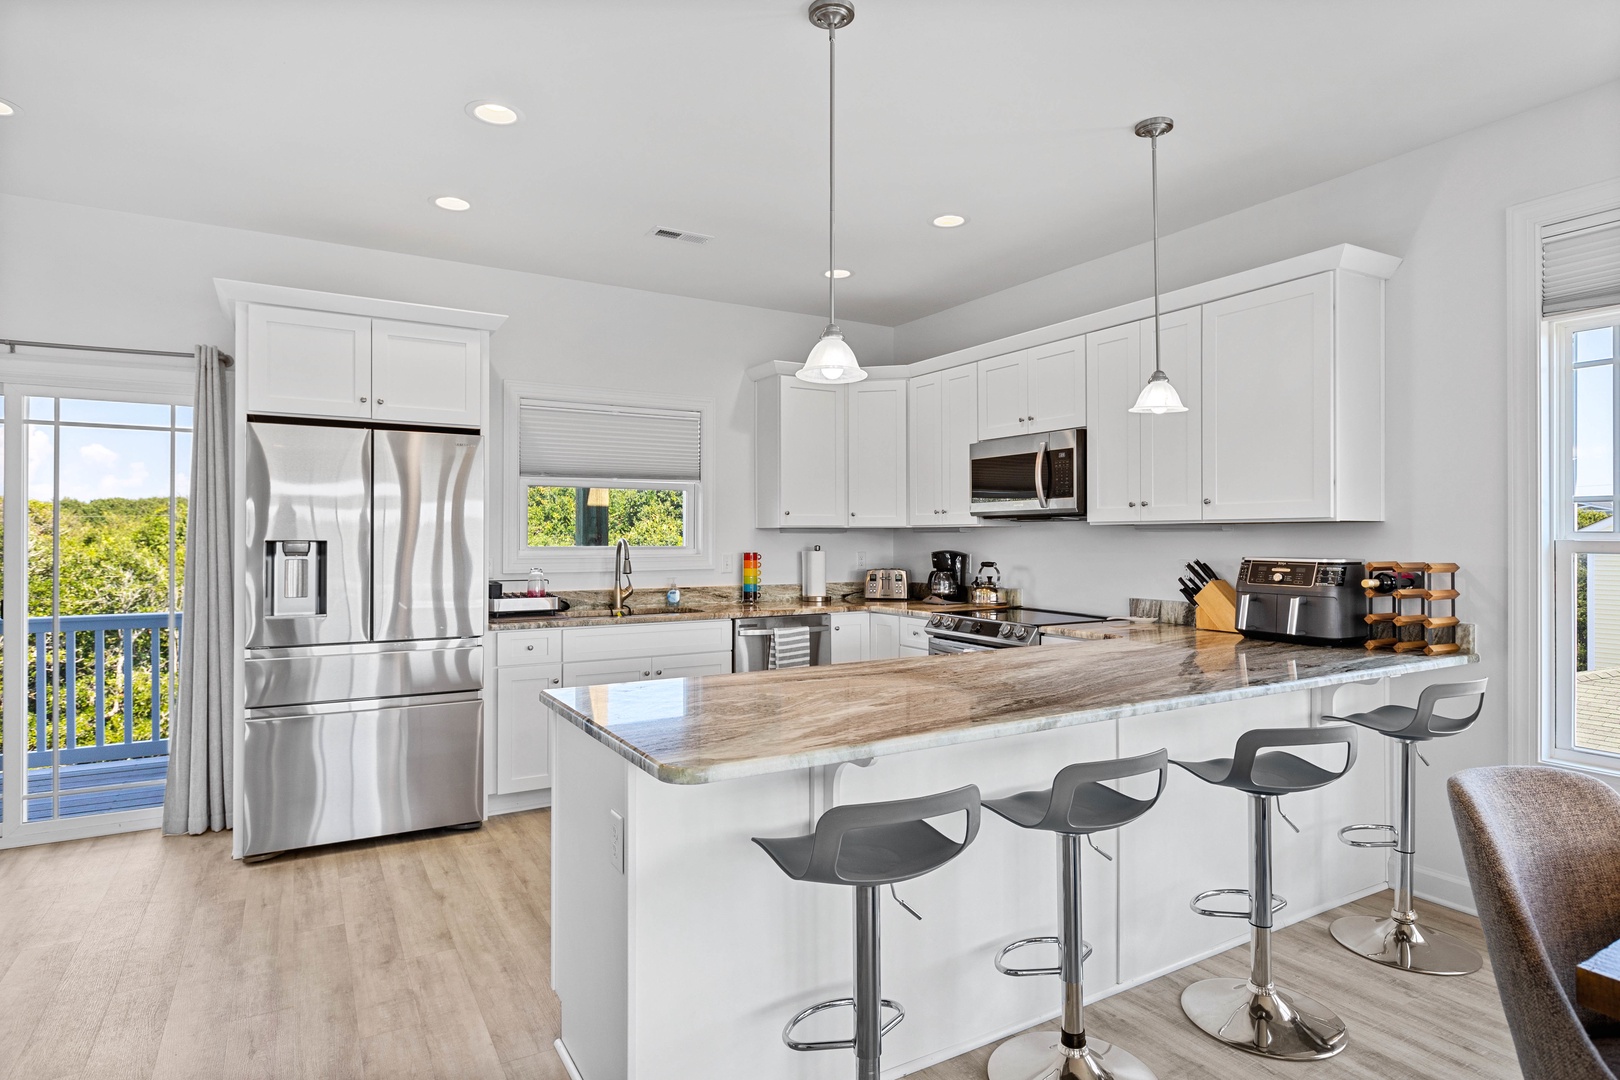 The well-stocked kitchen with stainless appliances and countertop seating